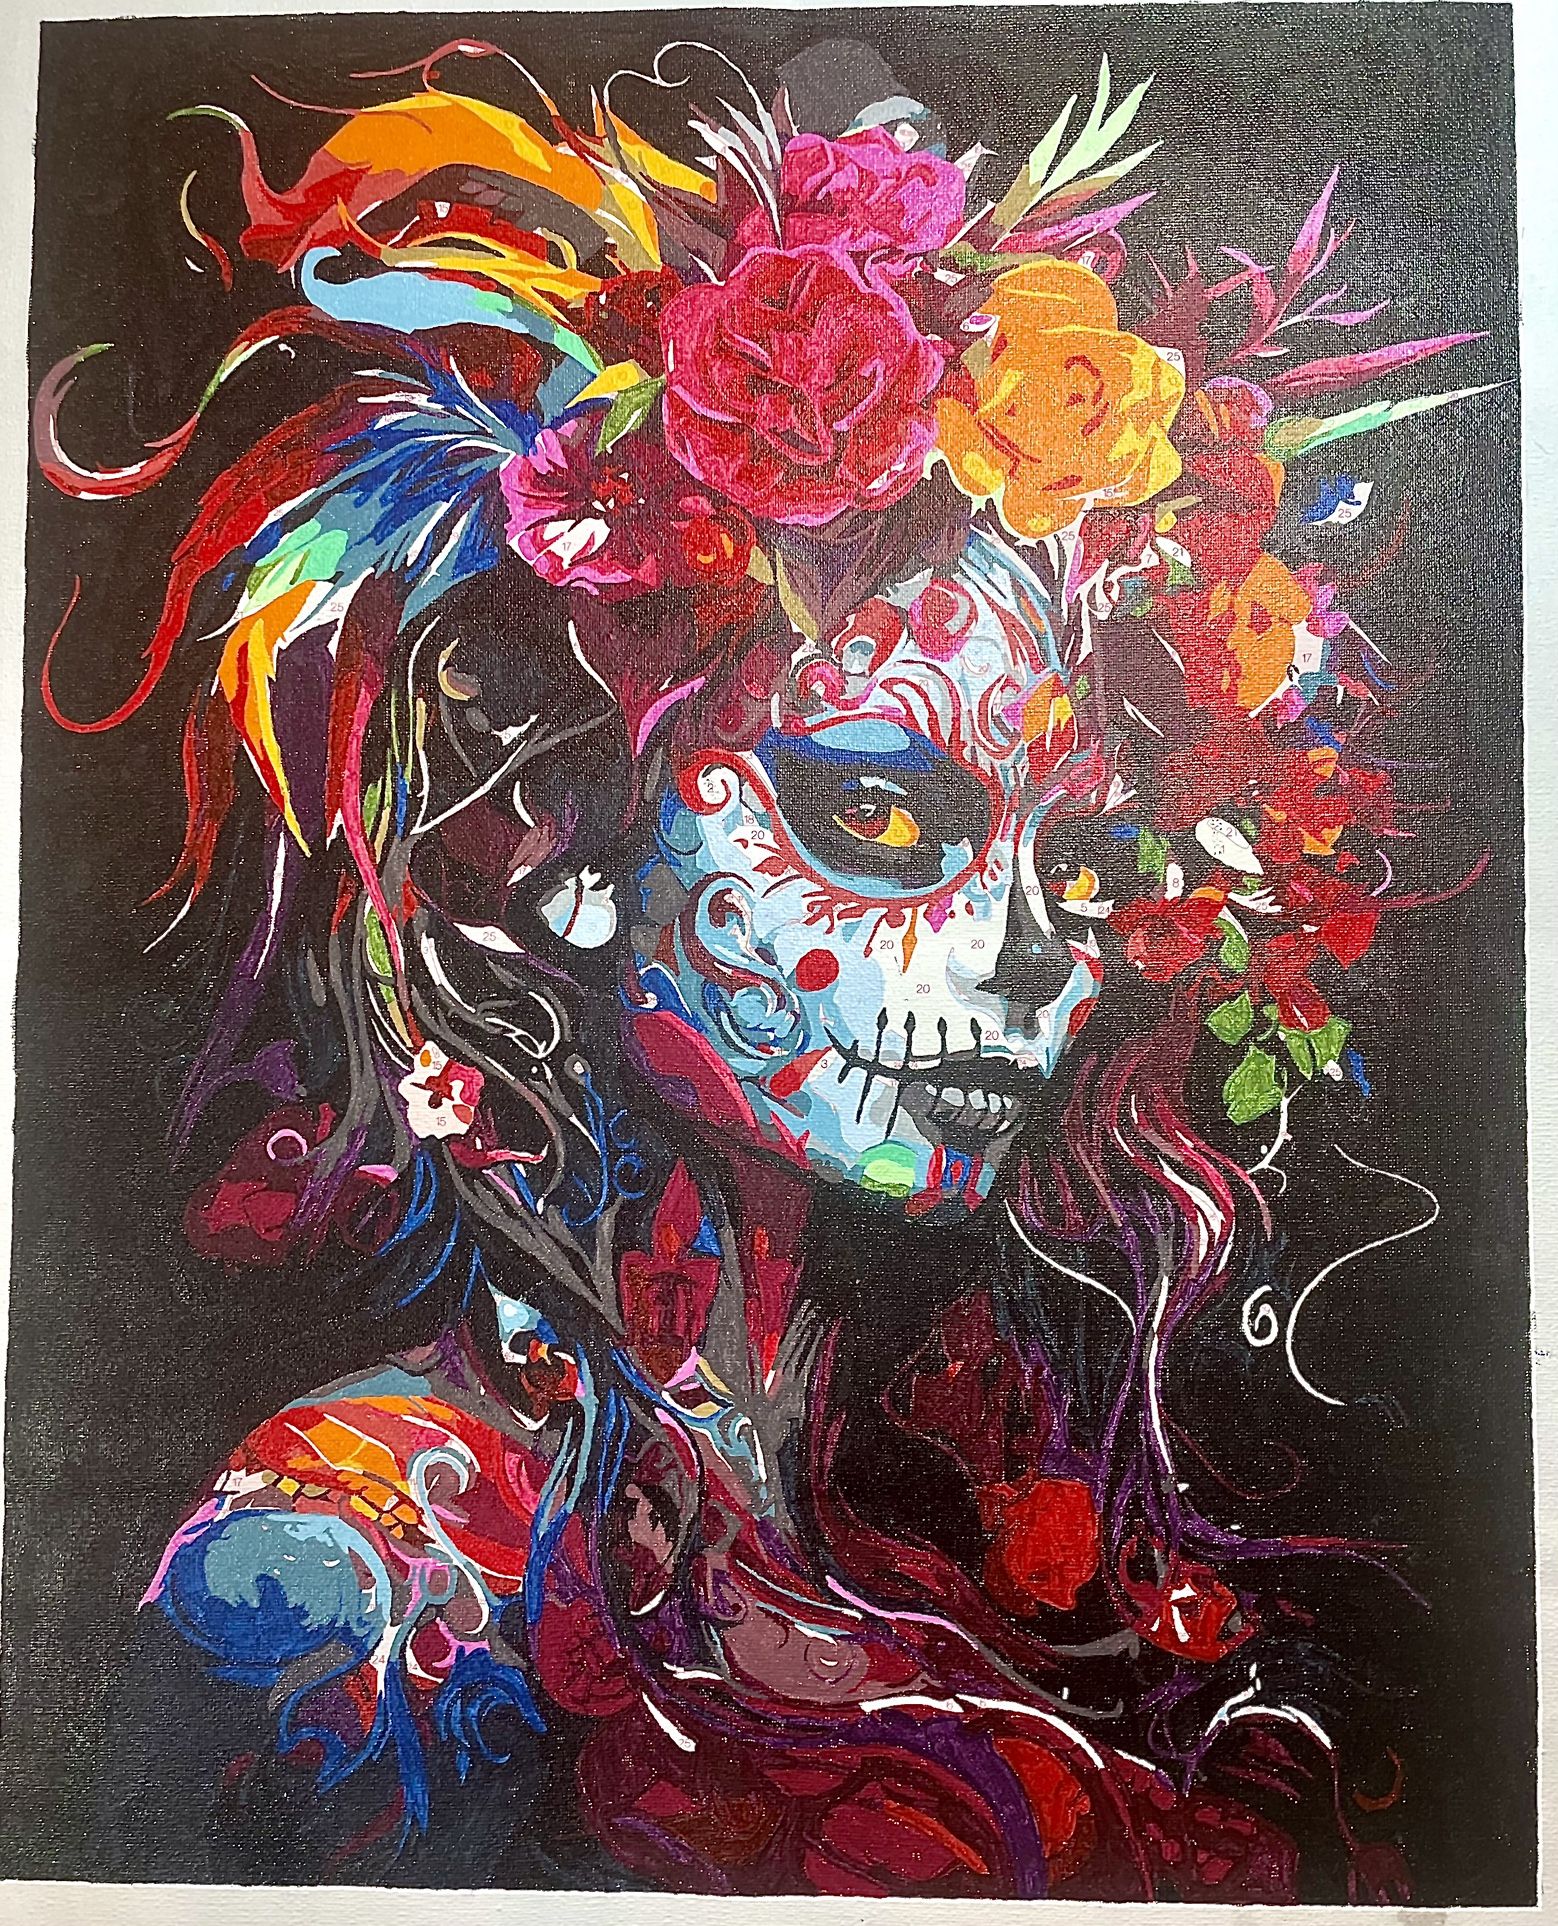 Hand painted Sugar skull/Day Of The Dead painting on canvas